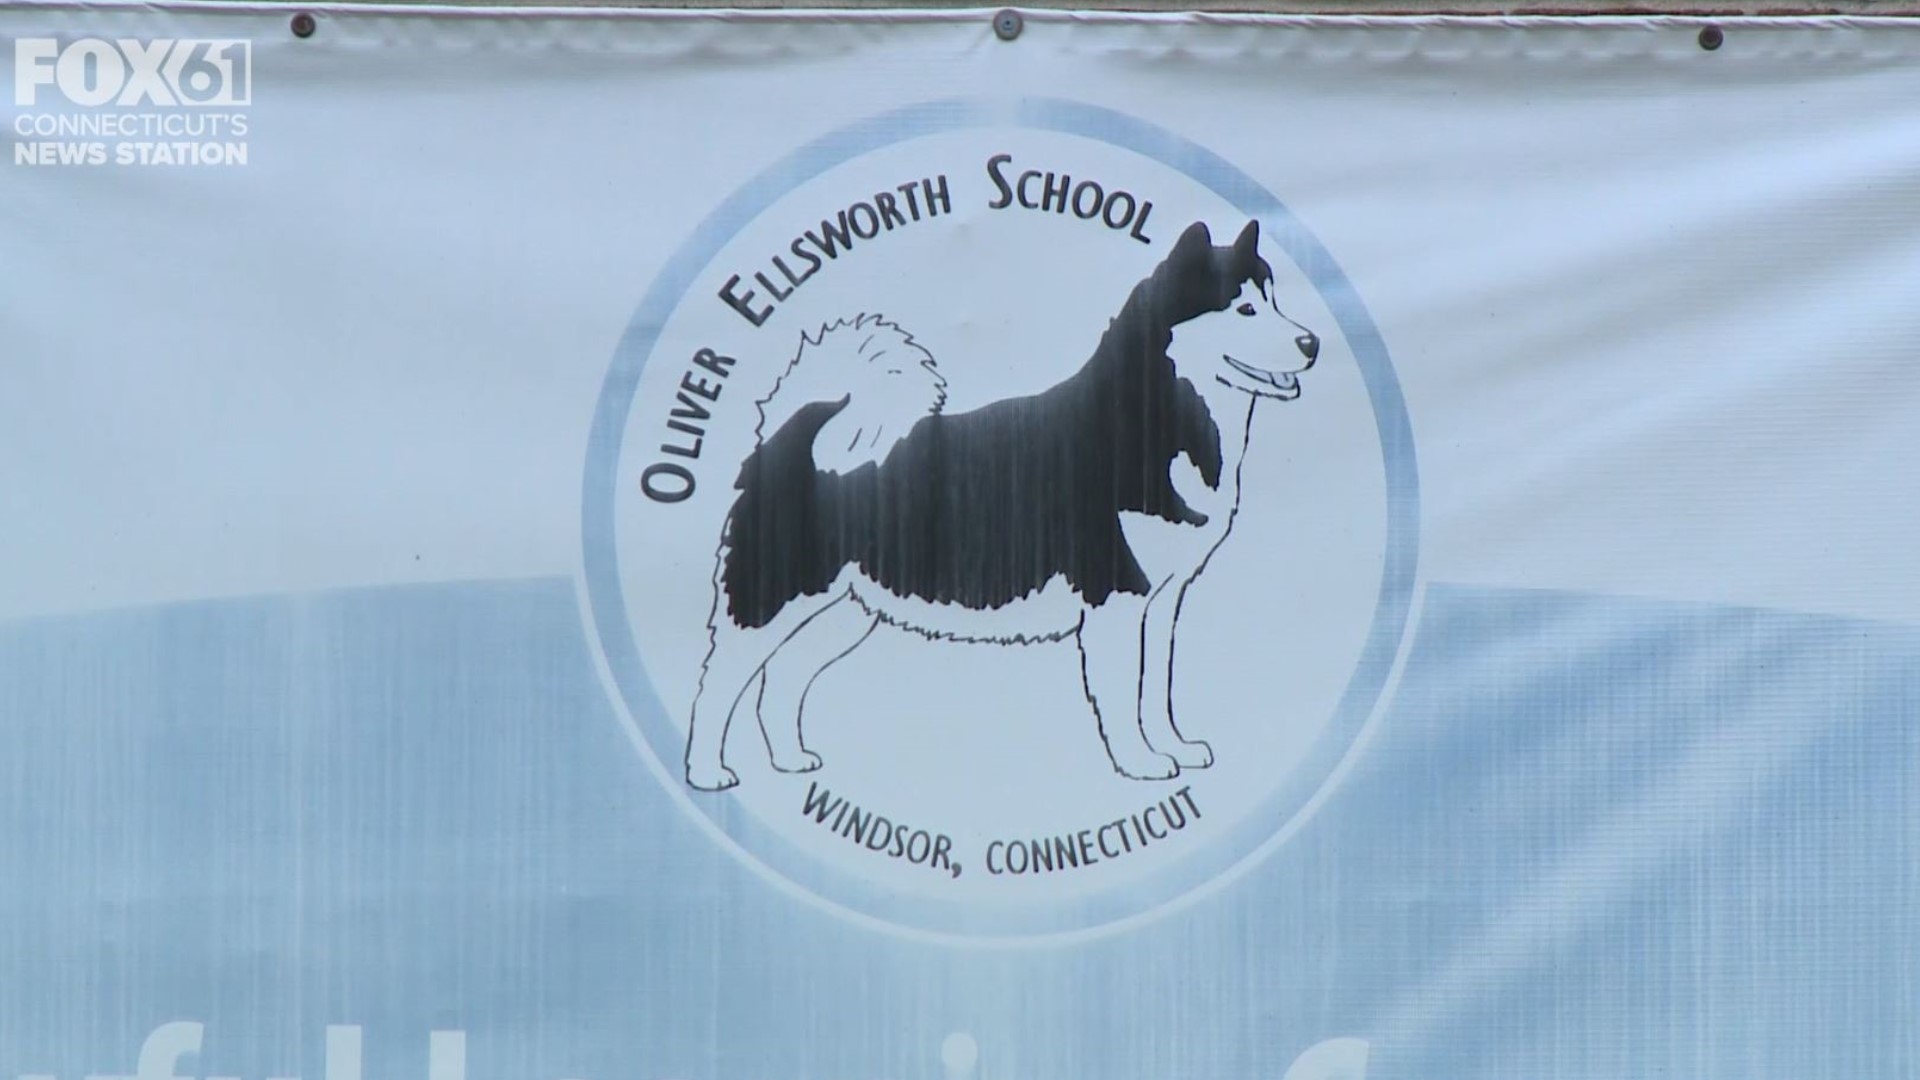 The typical back-to-school jitters are more like back-to-school nerves in Windsor, as parents are concerned about mold in Oliver Ellsworth Elementary School.